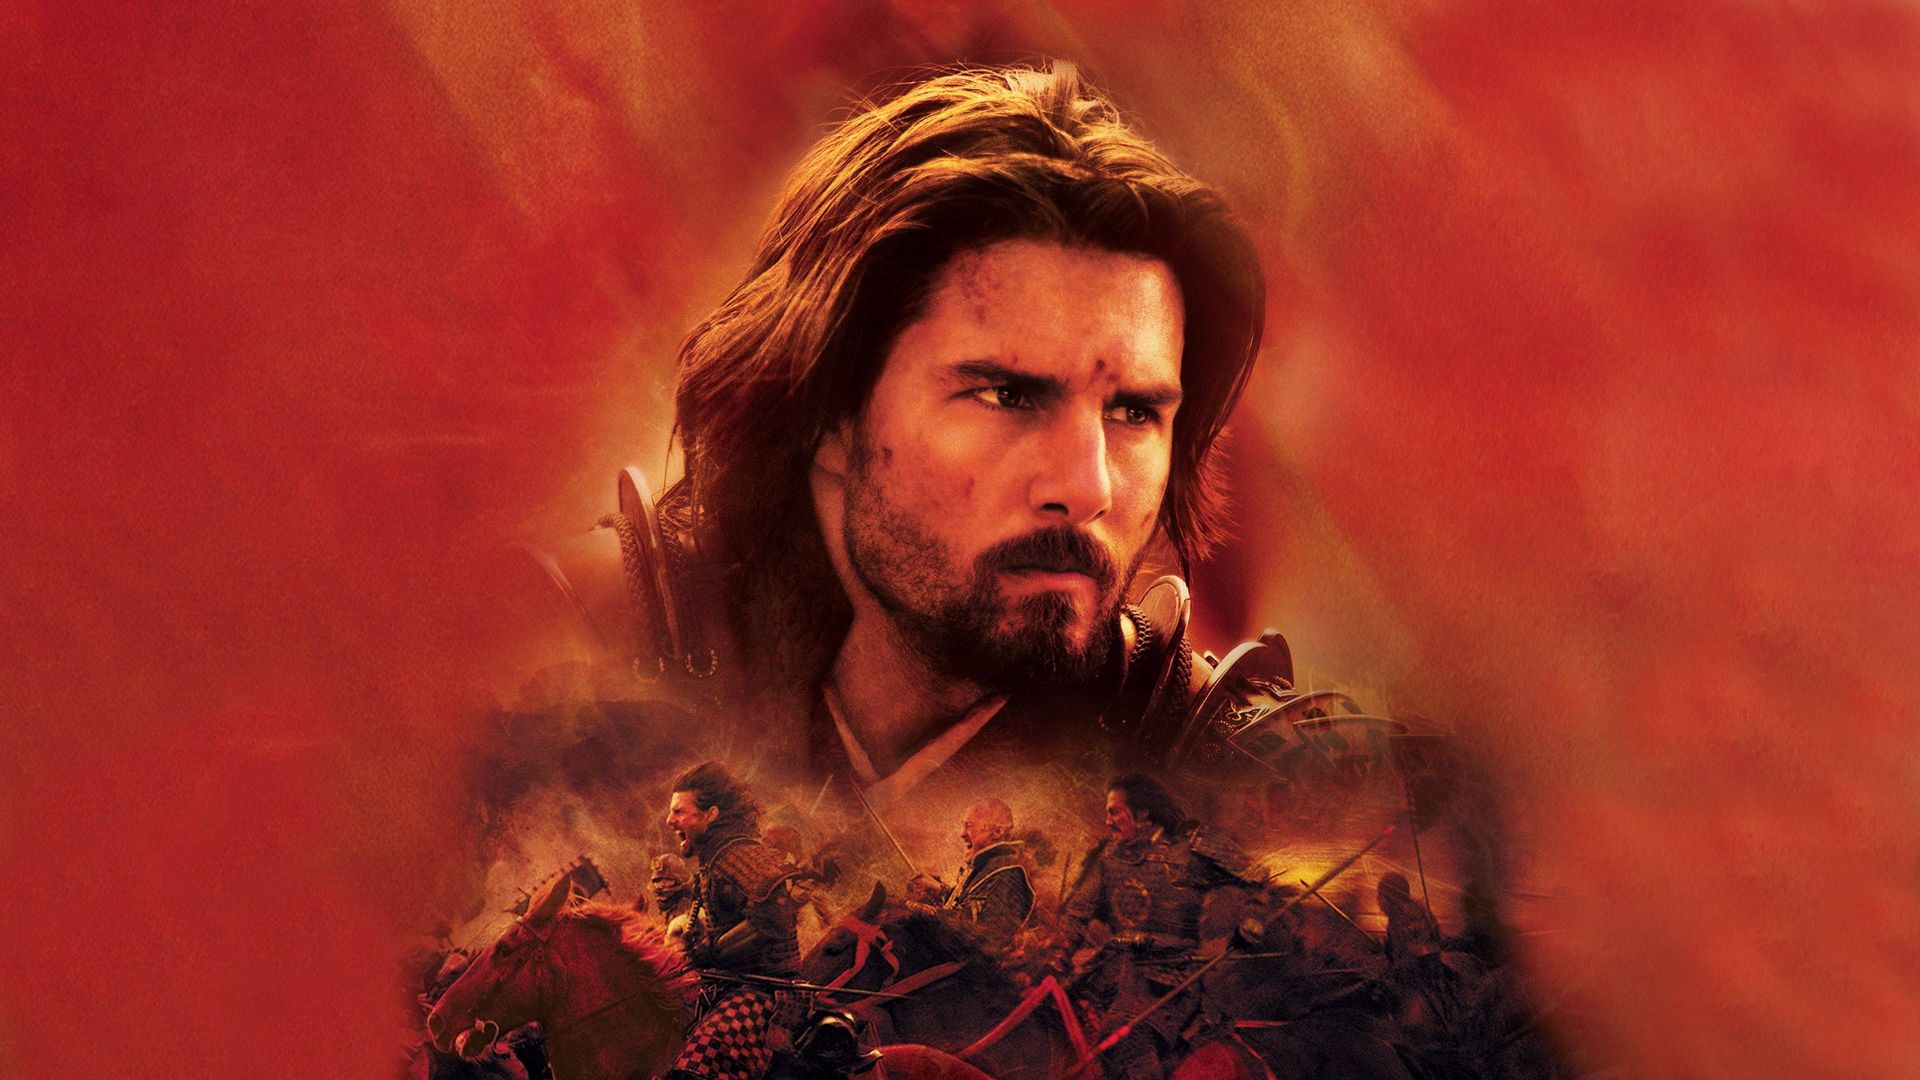 1920x1080 The Last Samurai (2003) Where to Watch It Streaming Online | Reelgood